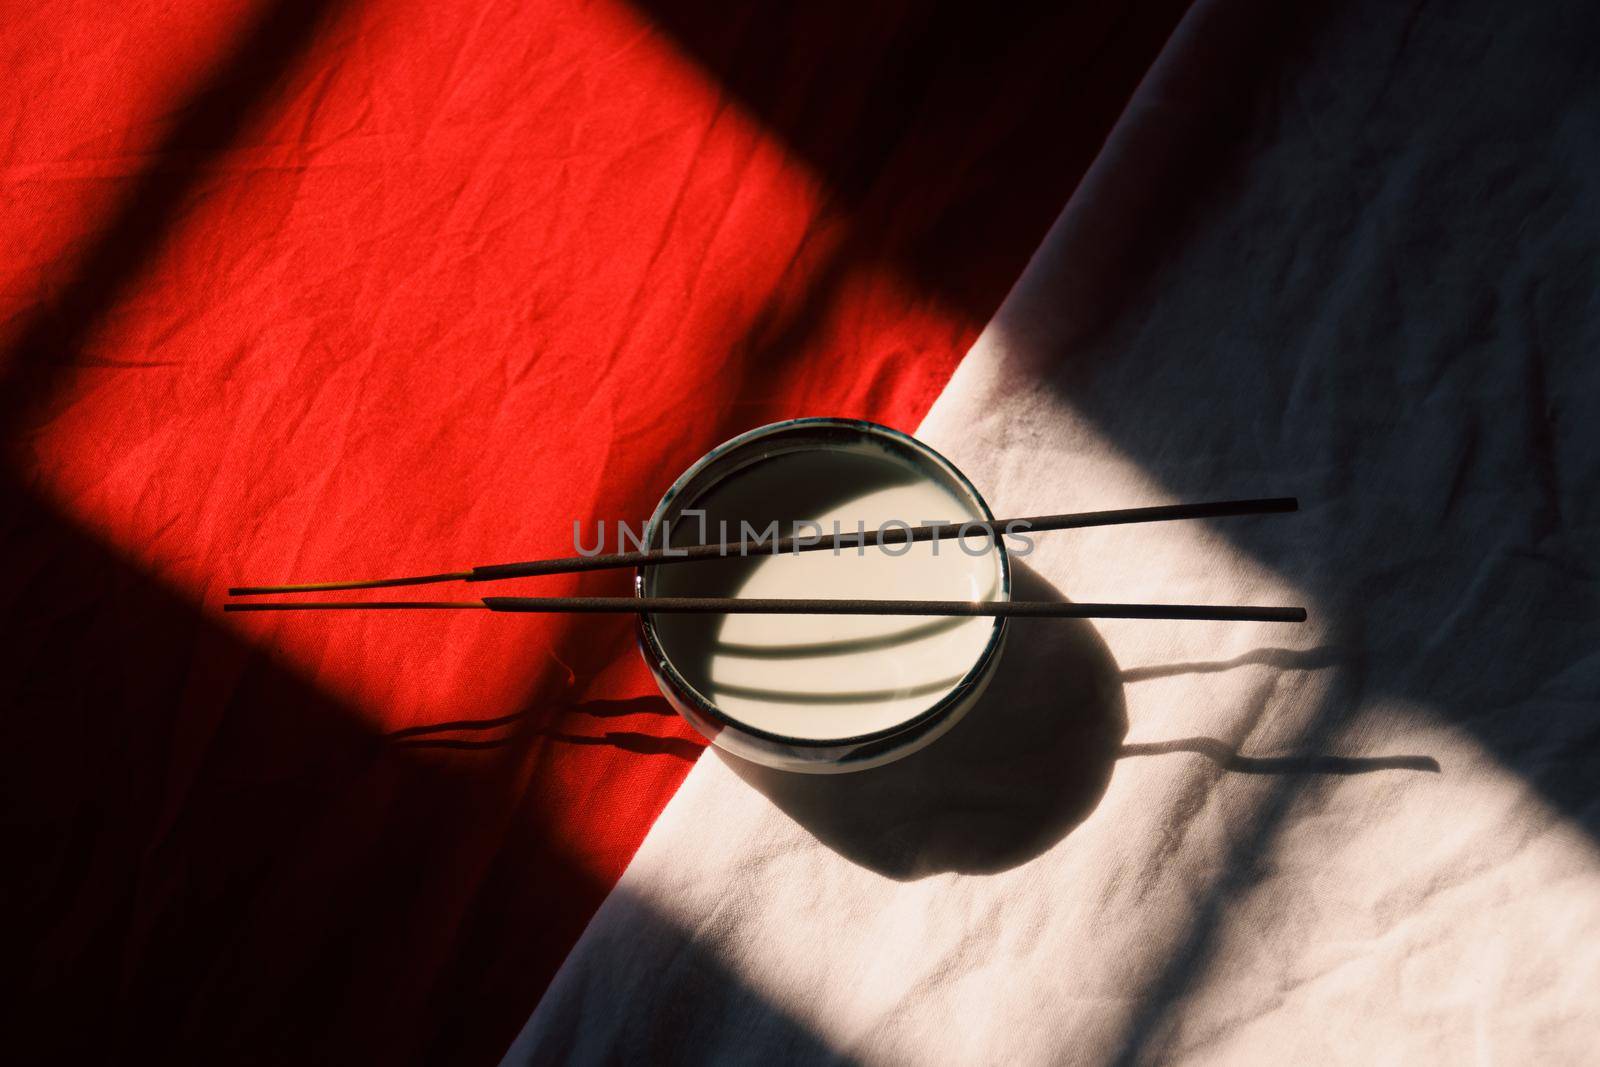 Light and shadows cast on a ceramic incense holder and sticks by Sonnet15